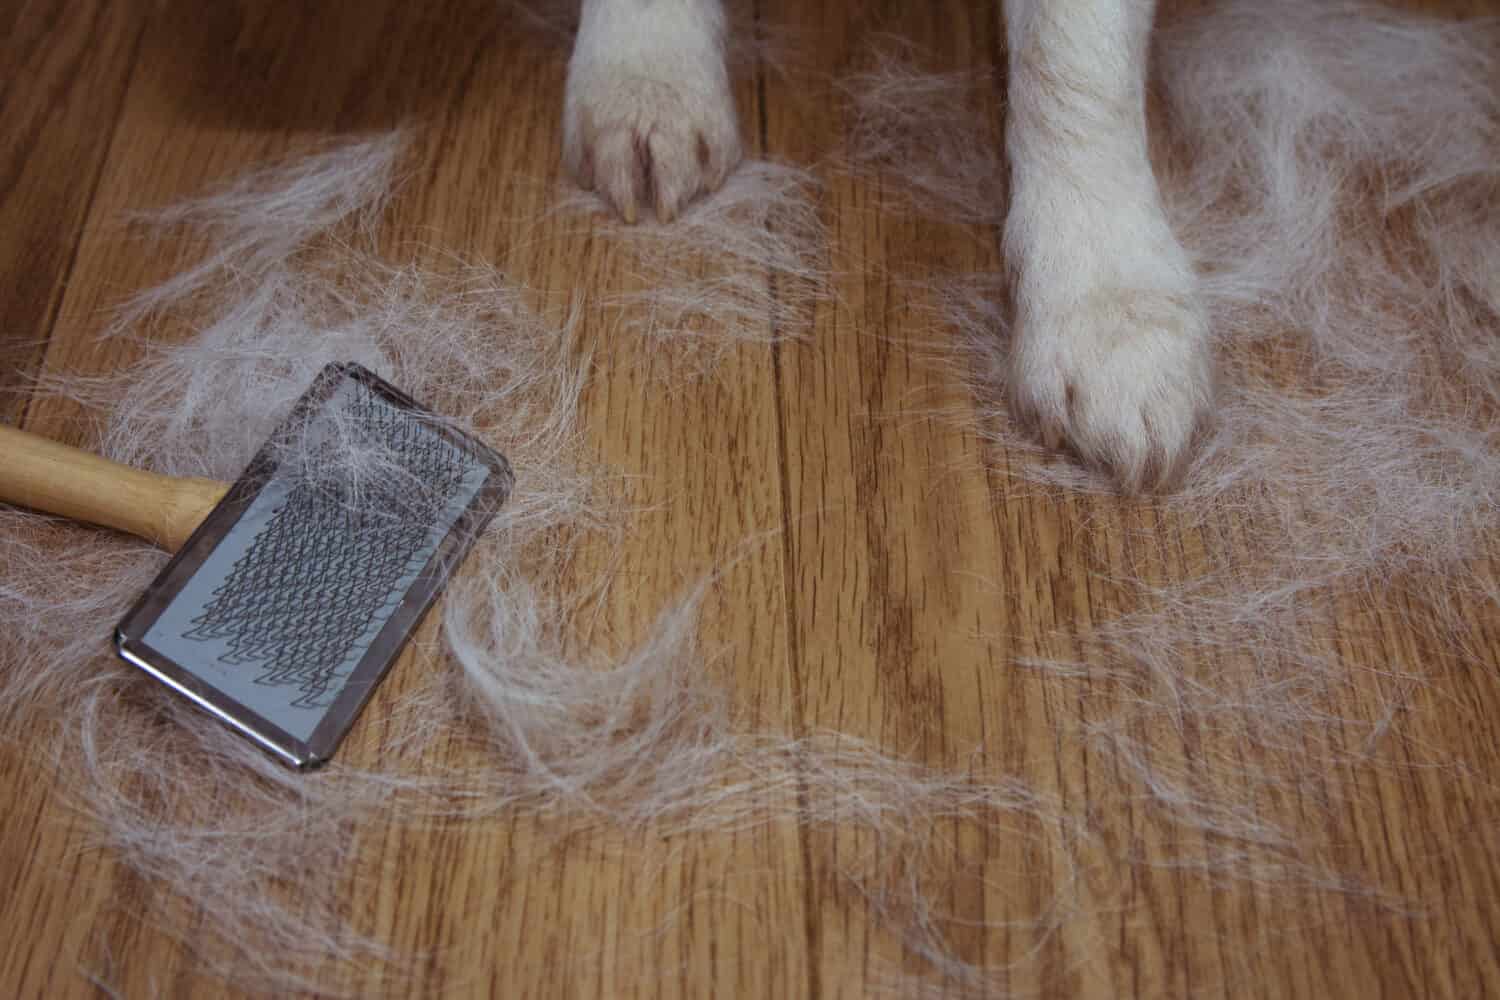 SHEDDING HAIR DOG OR CAT BACGROUNDS DURING MOLT SEASON, AFTER ITS OWNER  BRUSHED OR GROOMING THE PET WITH COPY SPACE.